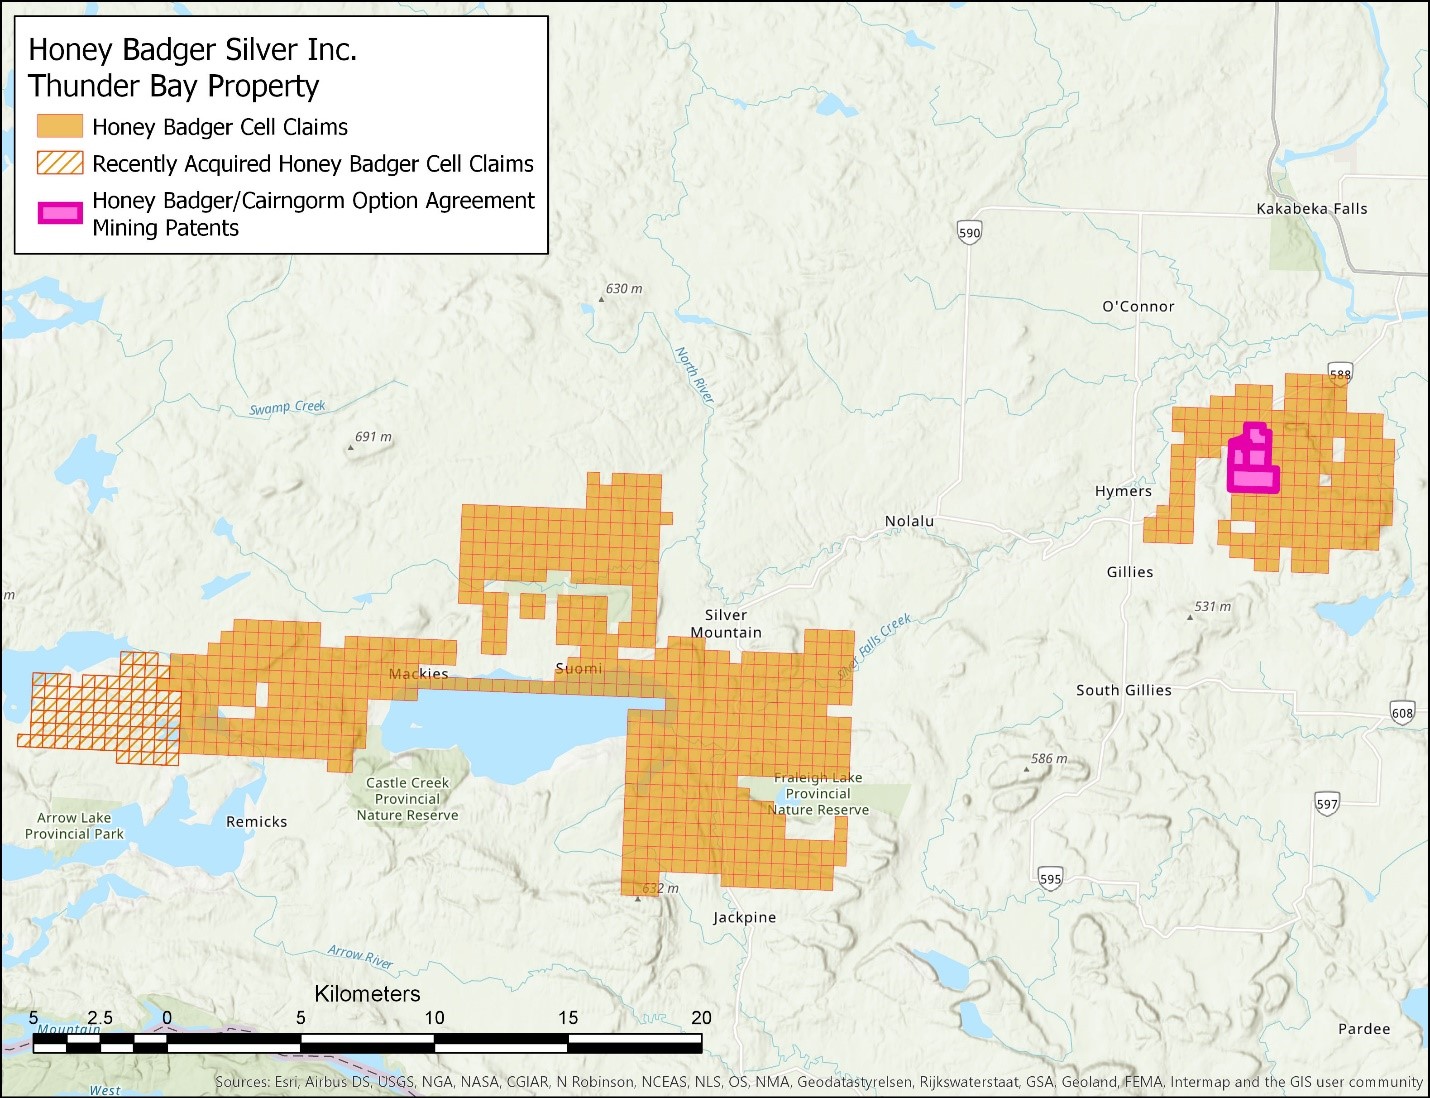 Figure 1: Map depicting Honey Badger's Property, Thunder Bay Silver District